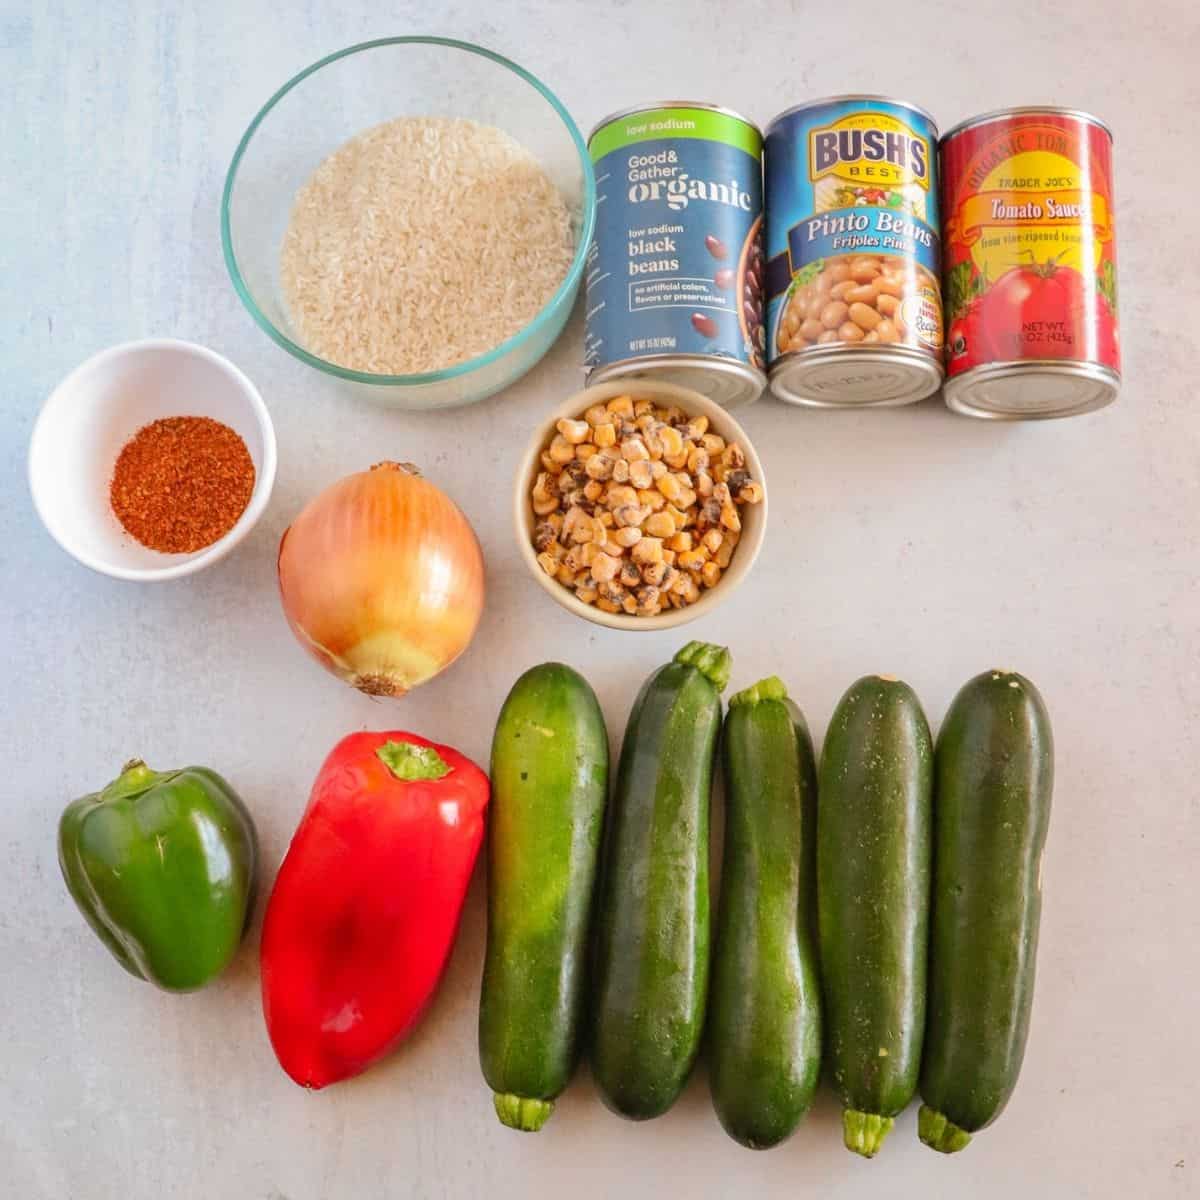 ingredients and cans on flat surface